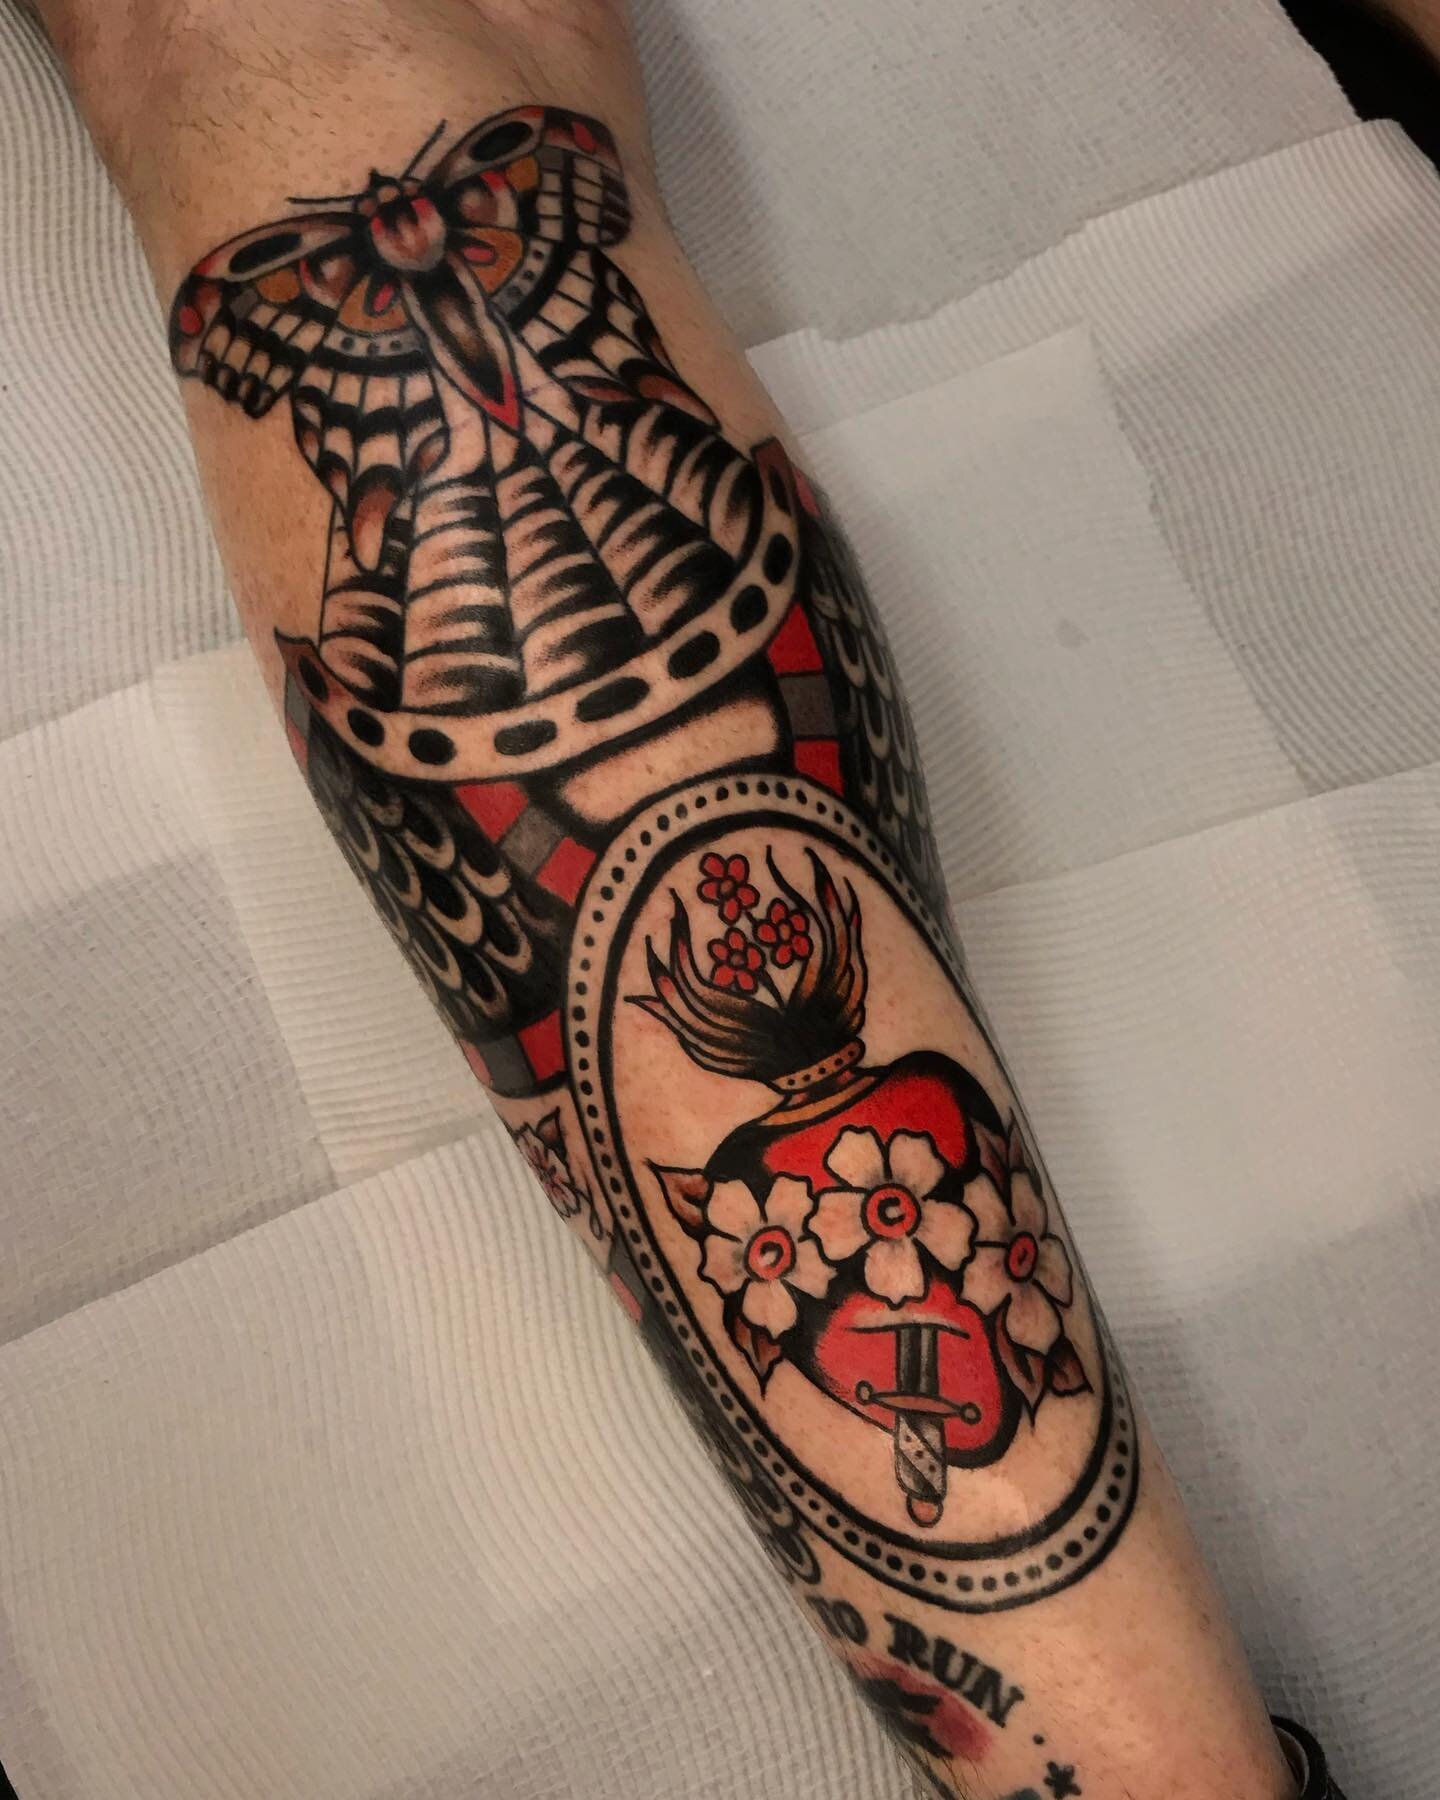 Fresh Neo Traditional Tattoo done by Lukas Adams at The Grand Reaper in San  Diego CA  rtattoos